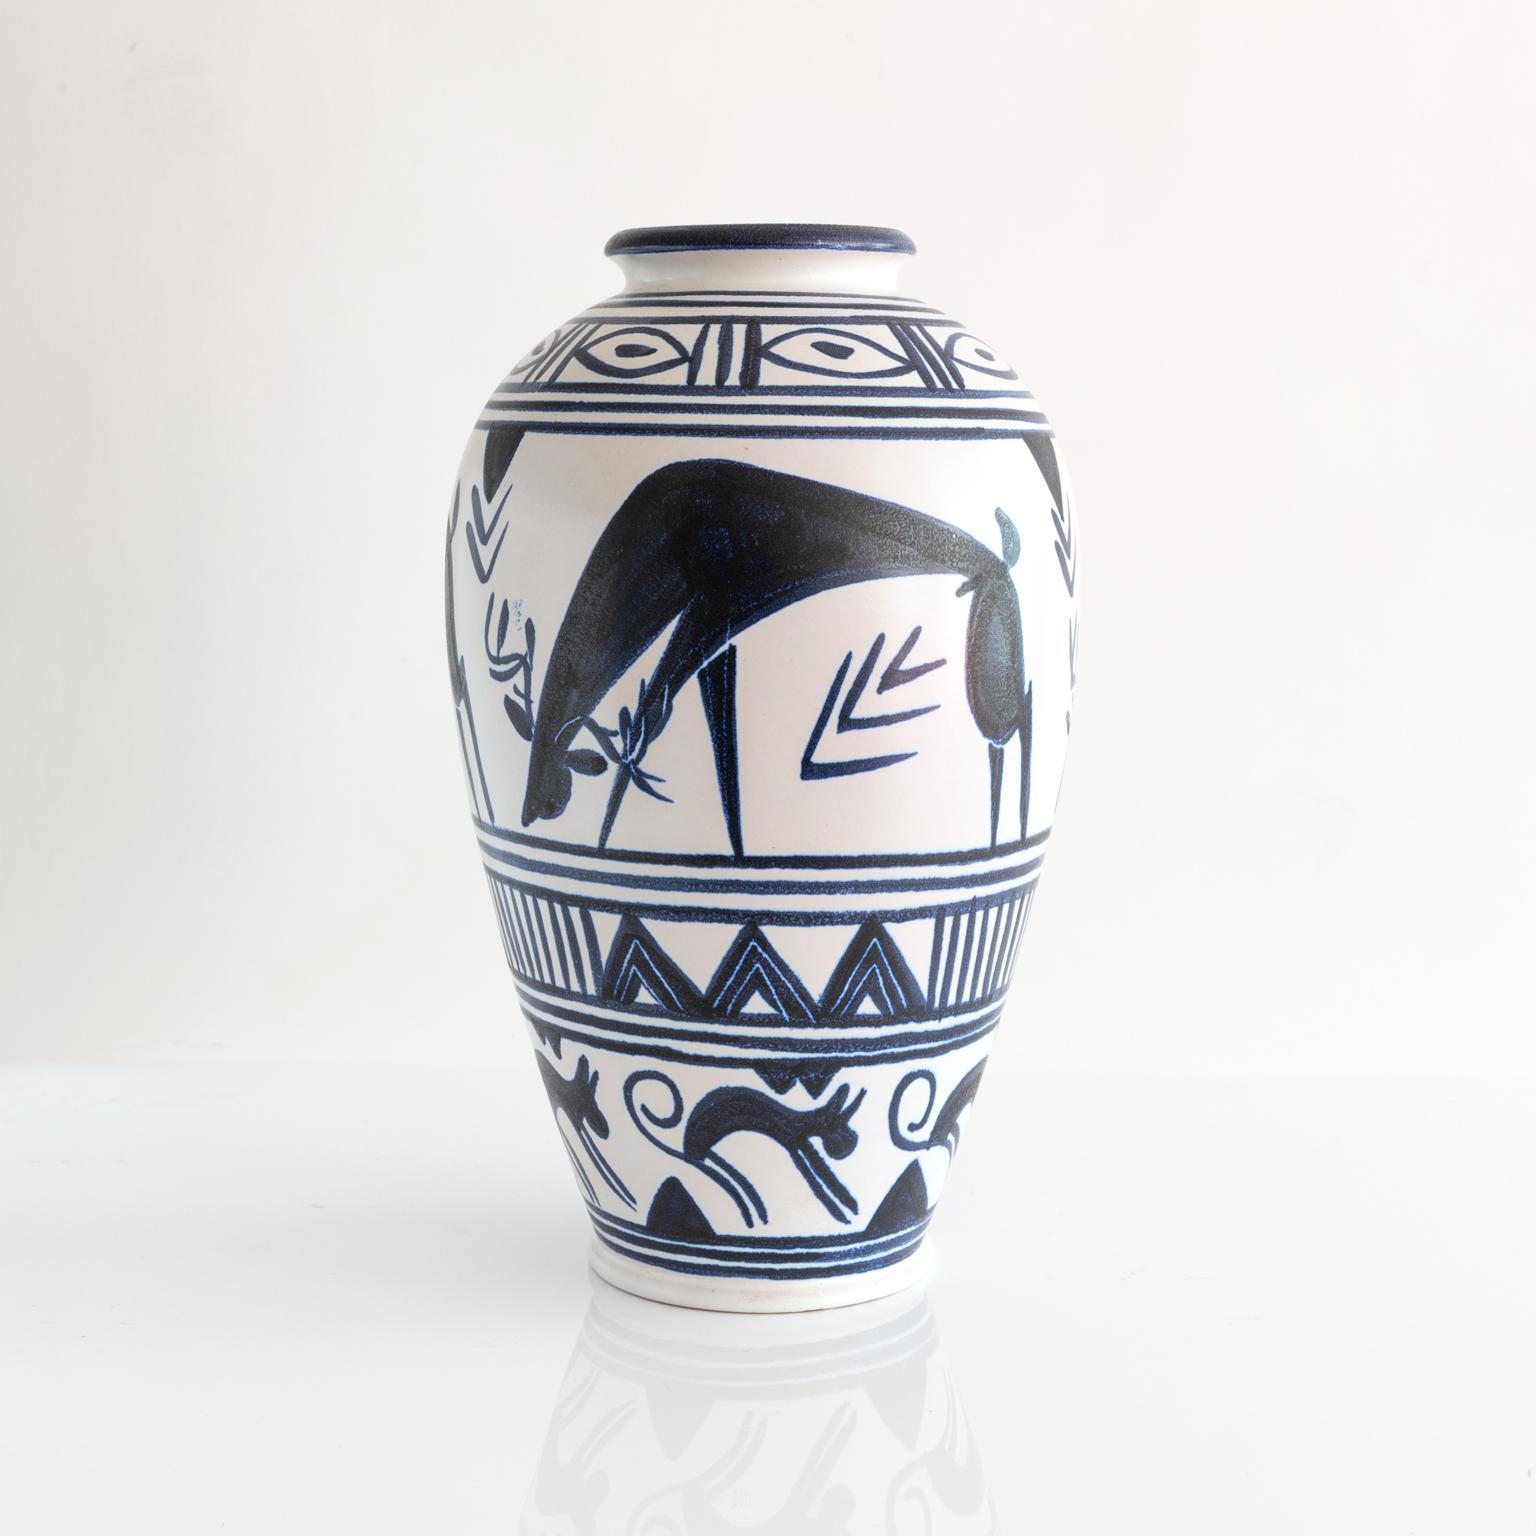 A large-scale, hand decorated vase by Danish artist Mette Doller for the Swedish company Andersson & Johansson - Höganäs Ceramic, circa 1950s. The vase depicts grazing deer and geometric patterns. Vases are not drilled but could be converted to